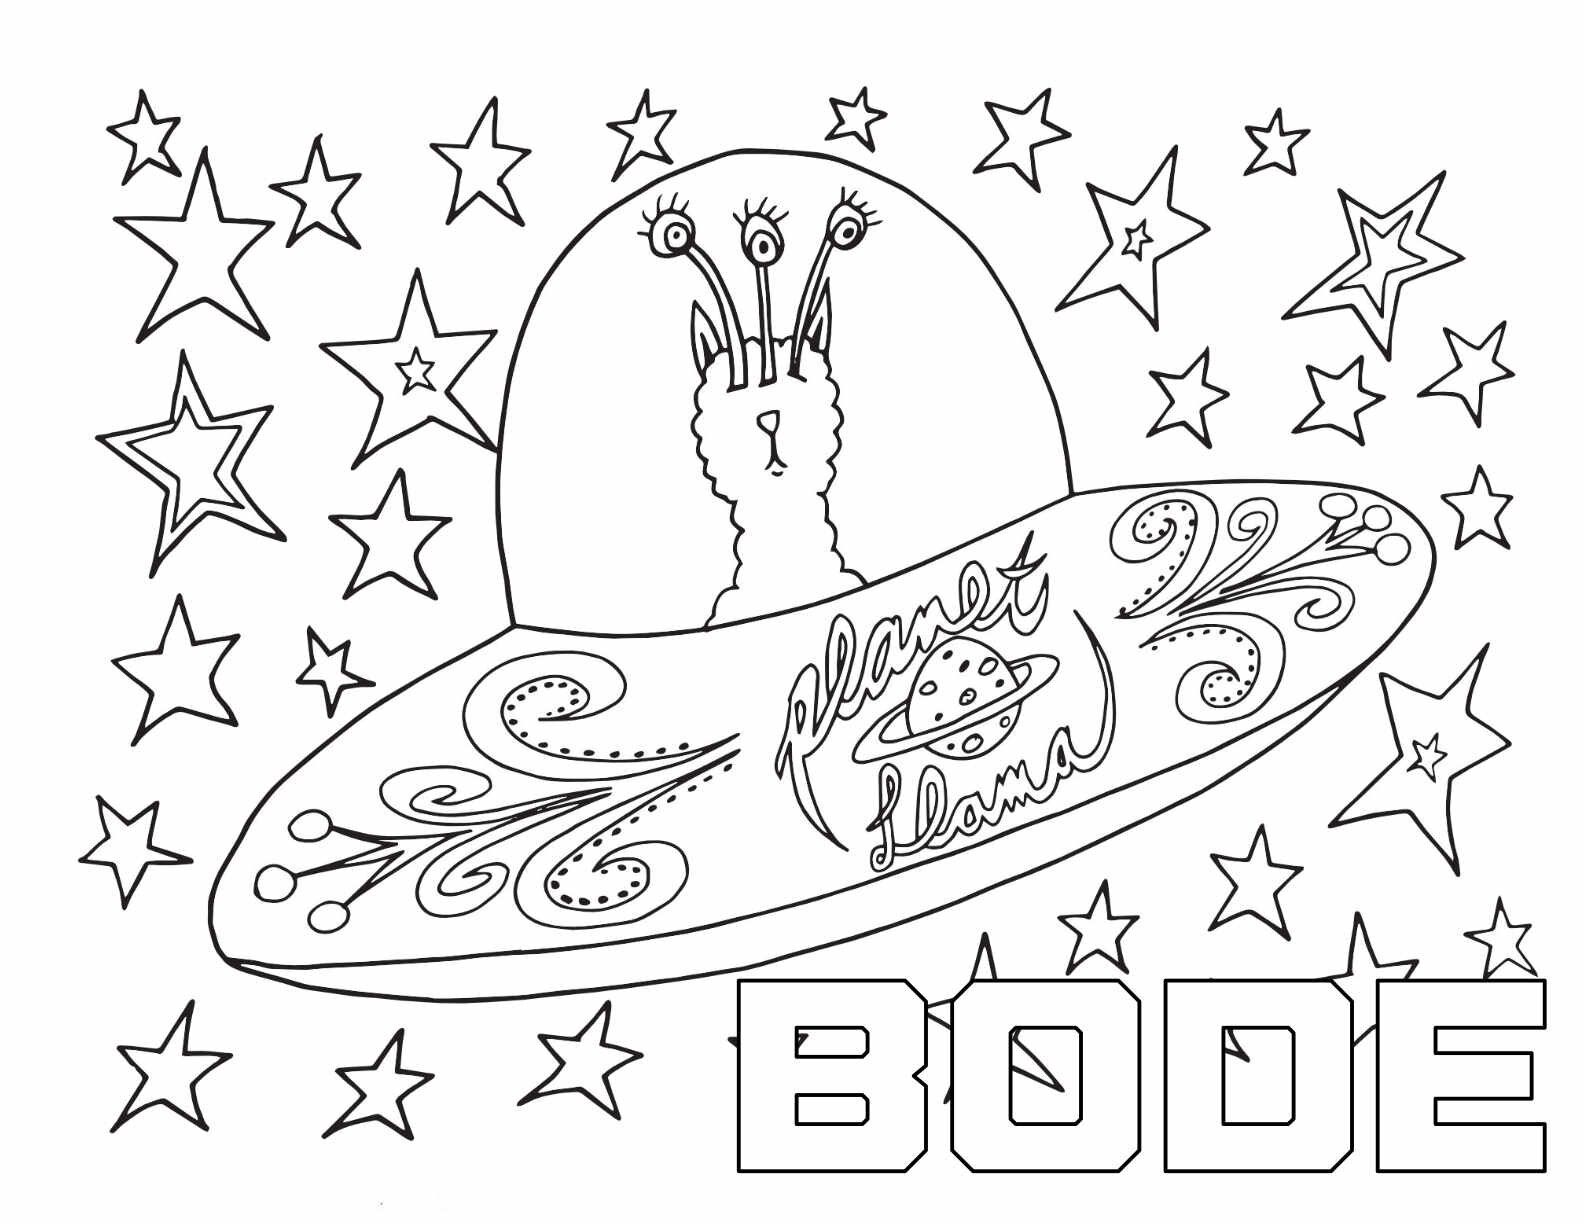 3 Free BODE Printable Coloring Page CLICK HERE TO DOWNLOAD THE PAGE ABOVE